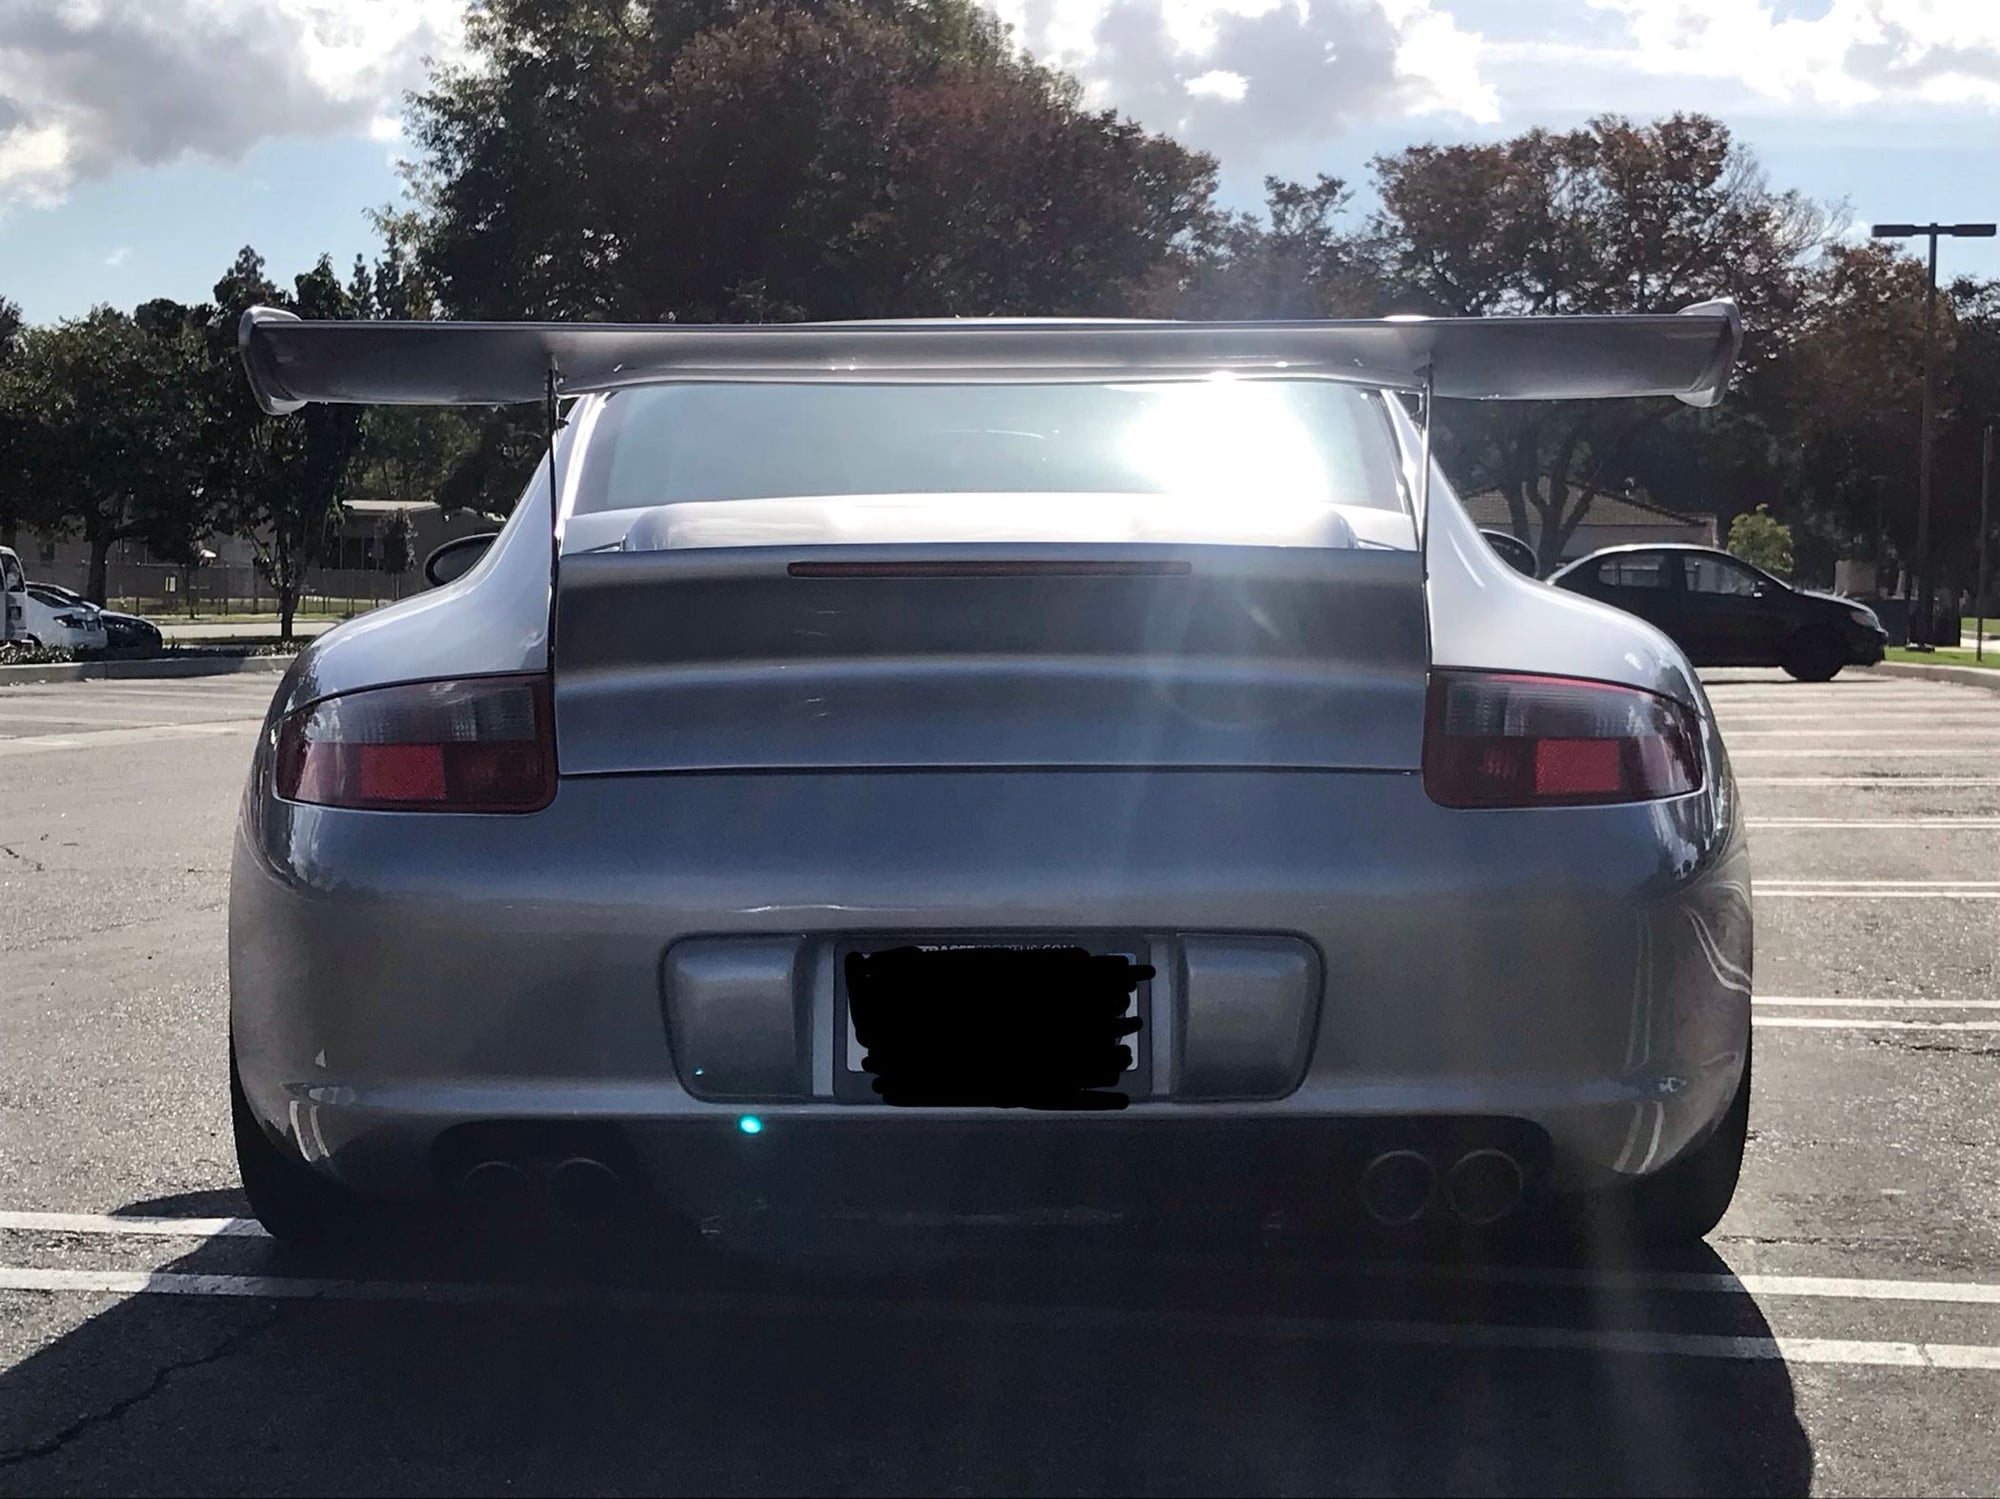 2006 Porsche 911 - SoCal: 2006 Porsche Carrera S 997.1 911 *Carfax Included* - Used - VIN WP0AB29926S744384 - 109,000 Miles - 6 cyl - 2WD - Manual - Coupe - Silver - Cerritos, CA 90701, United States